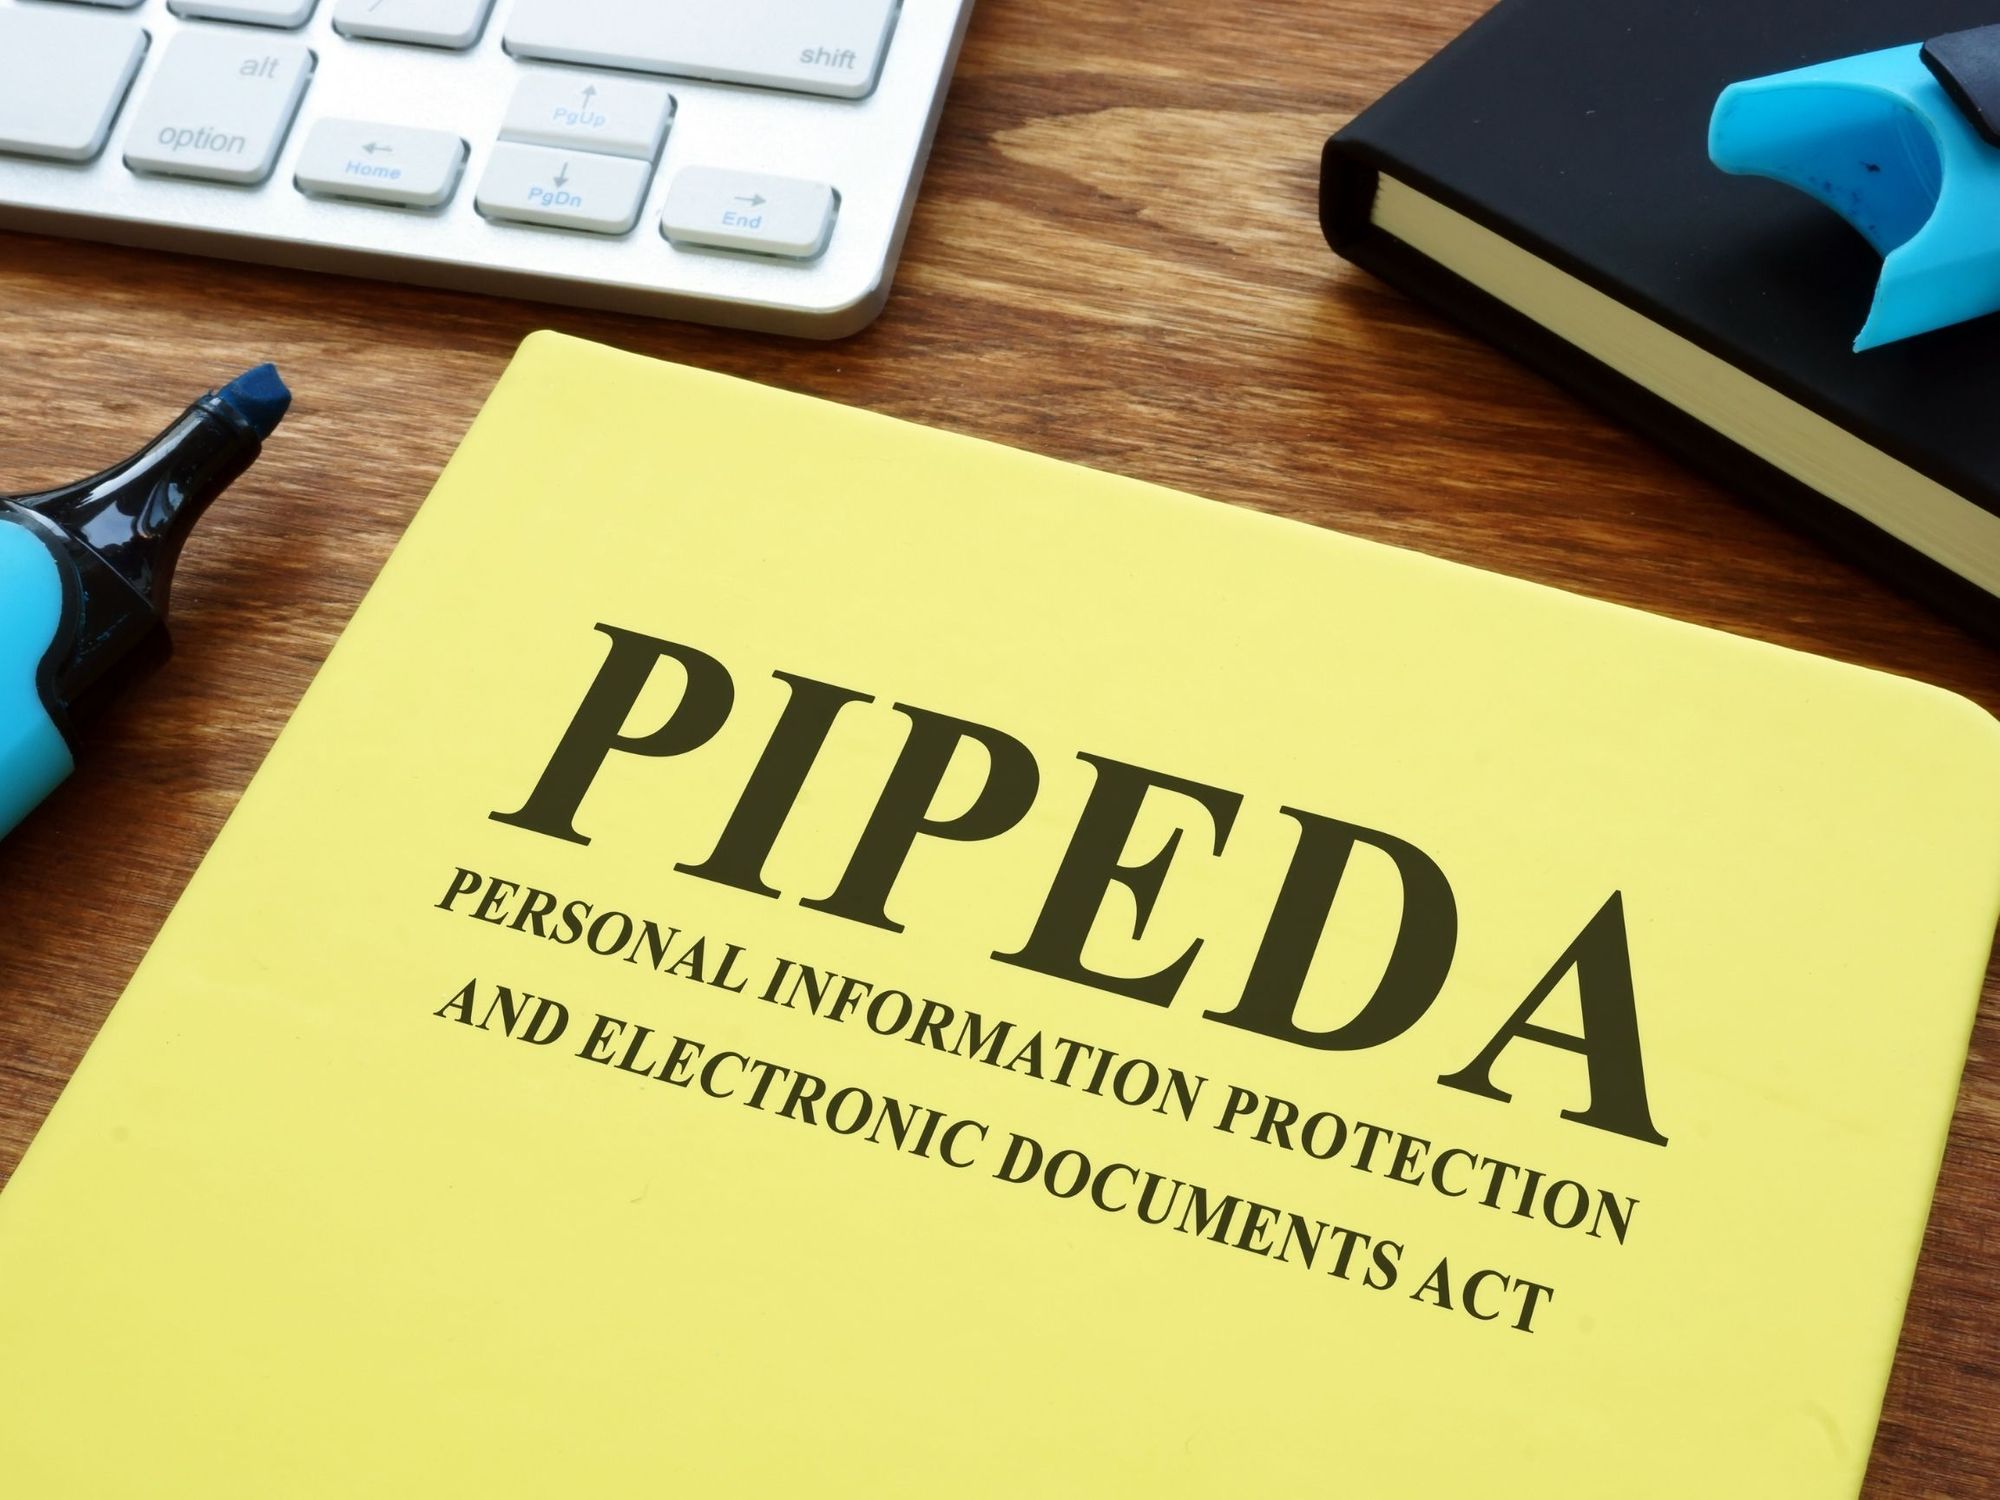 What is PIPEDA?